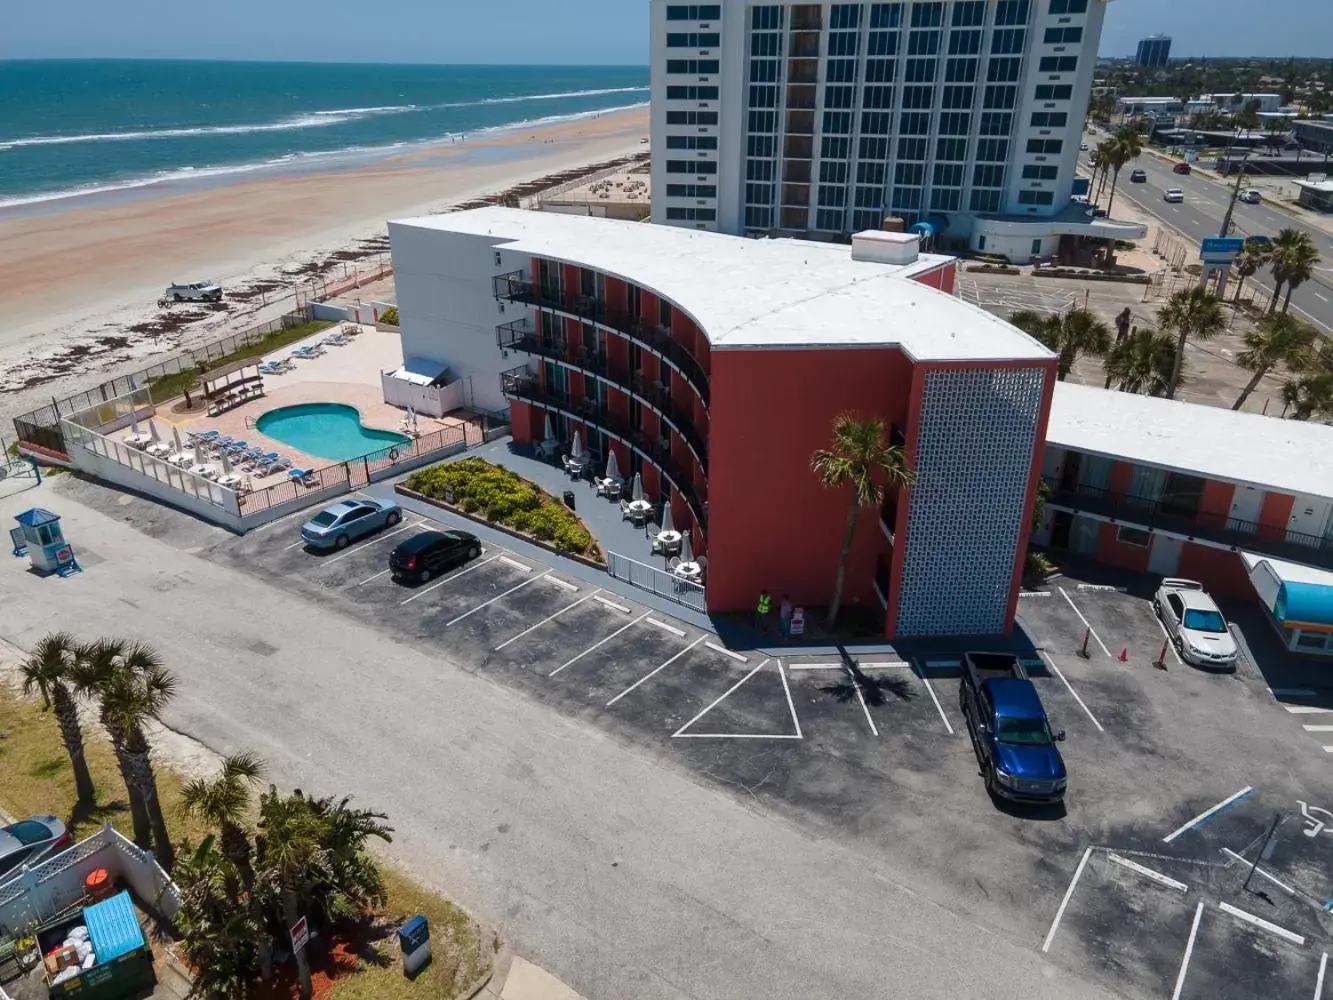 Property building, Bird's-eye View in Cove Motel Oceanfront